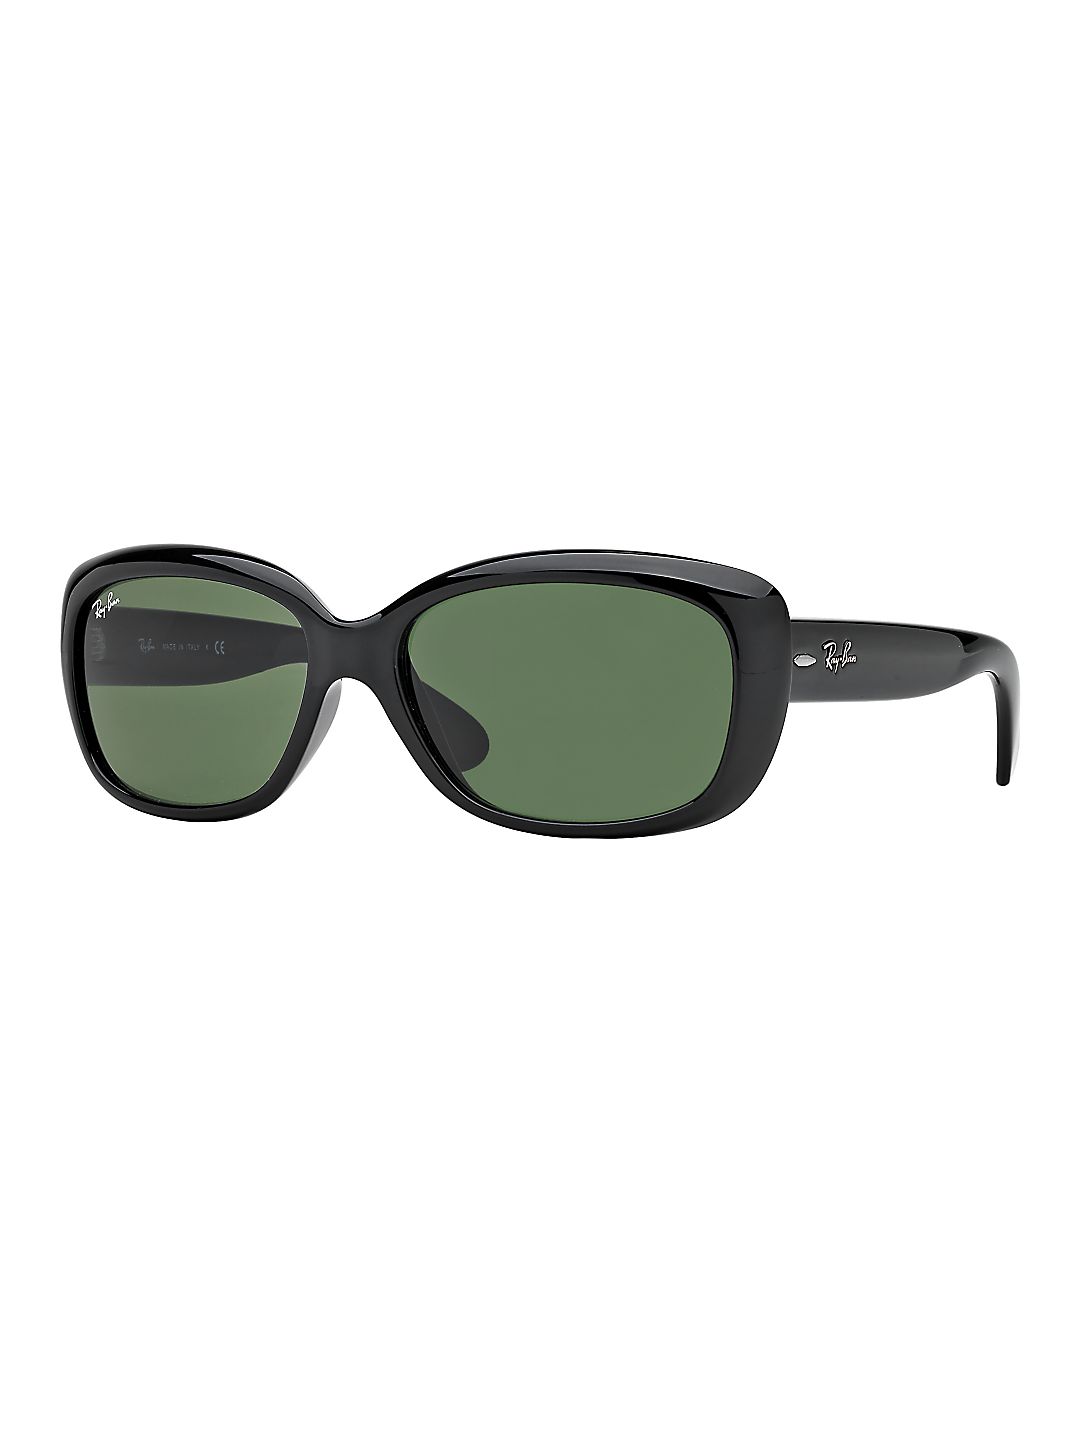 Ray-Ban Women's RB4101 Jackie Ohh Sunglasses, 58mm - image 2 of 2